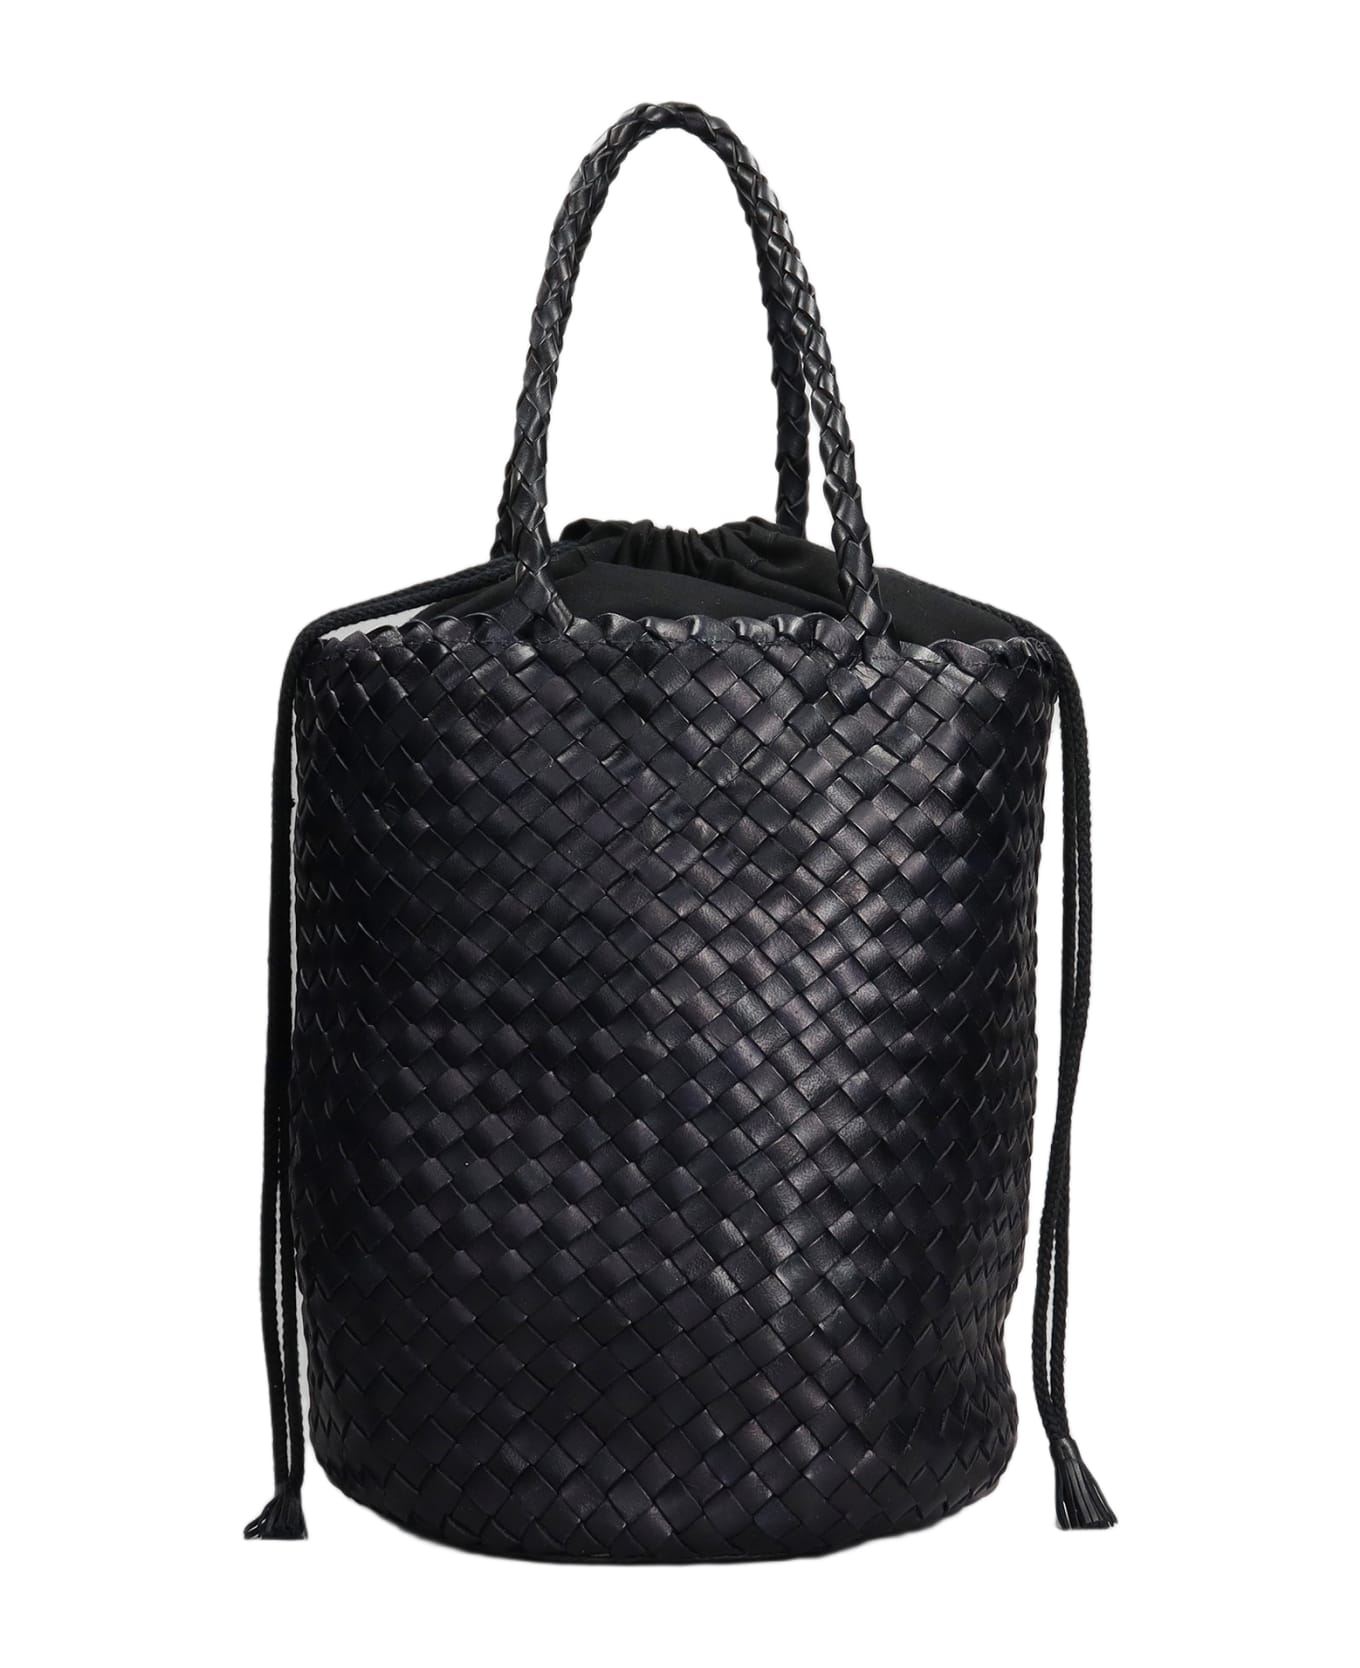 Dragon Diffusion Jacky Bucket Hand Bag In Black Leather - black